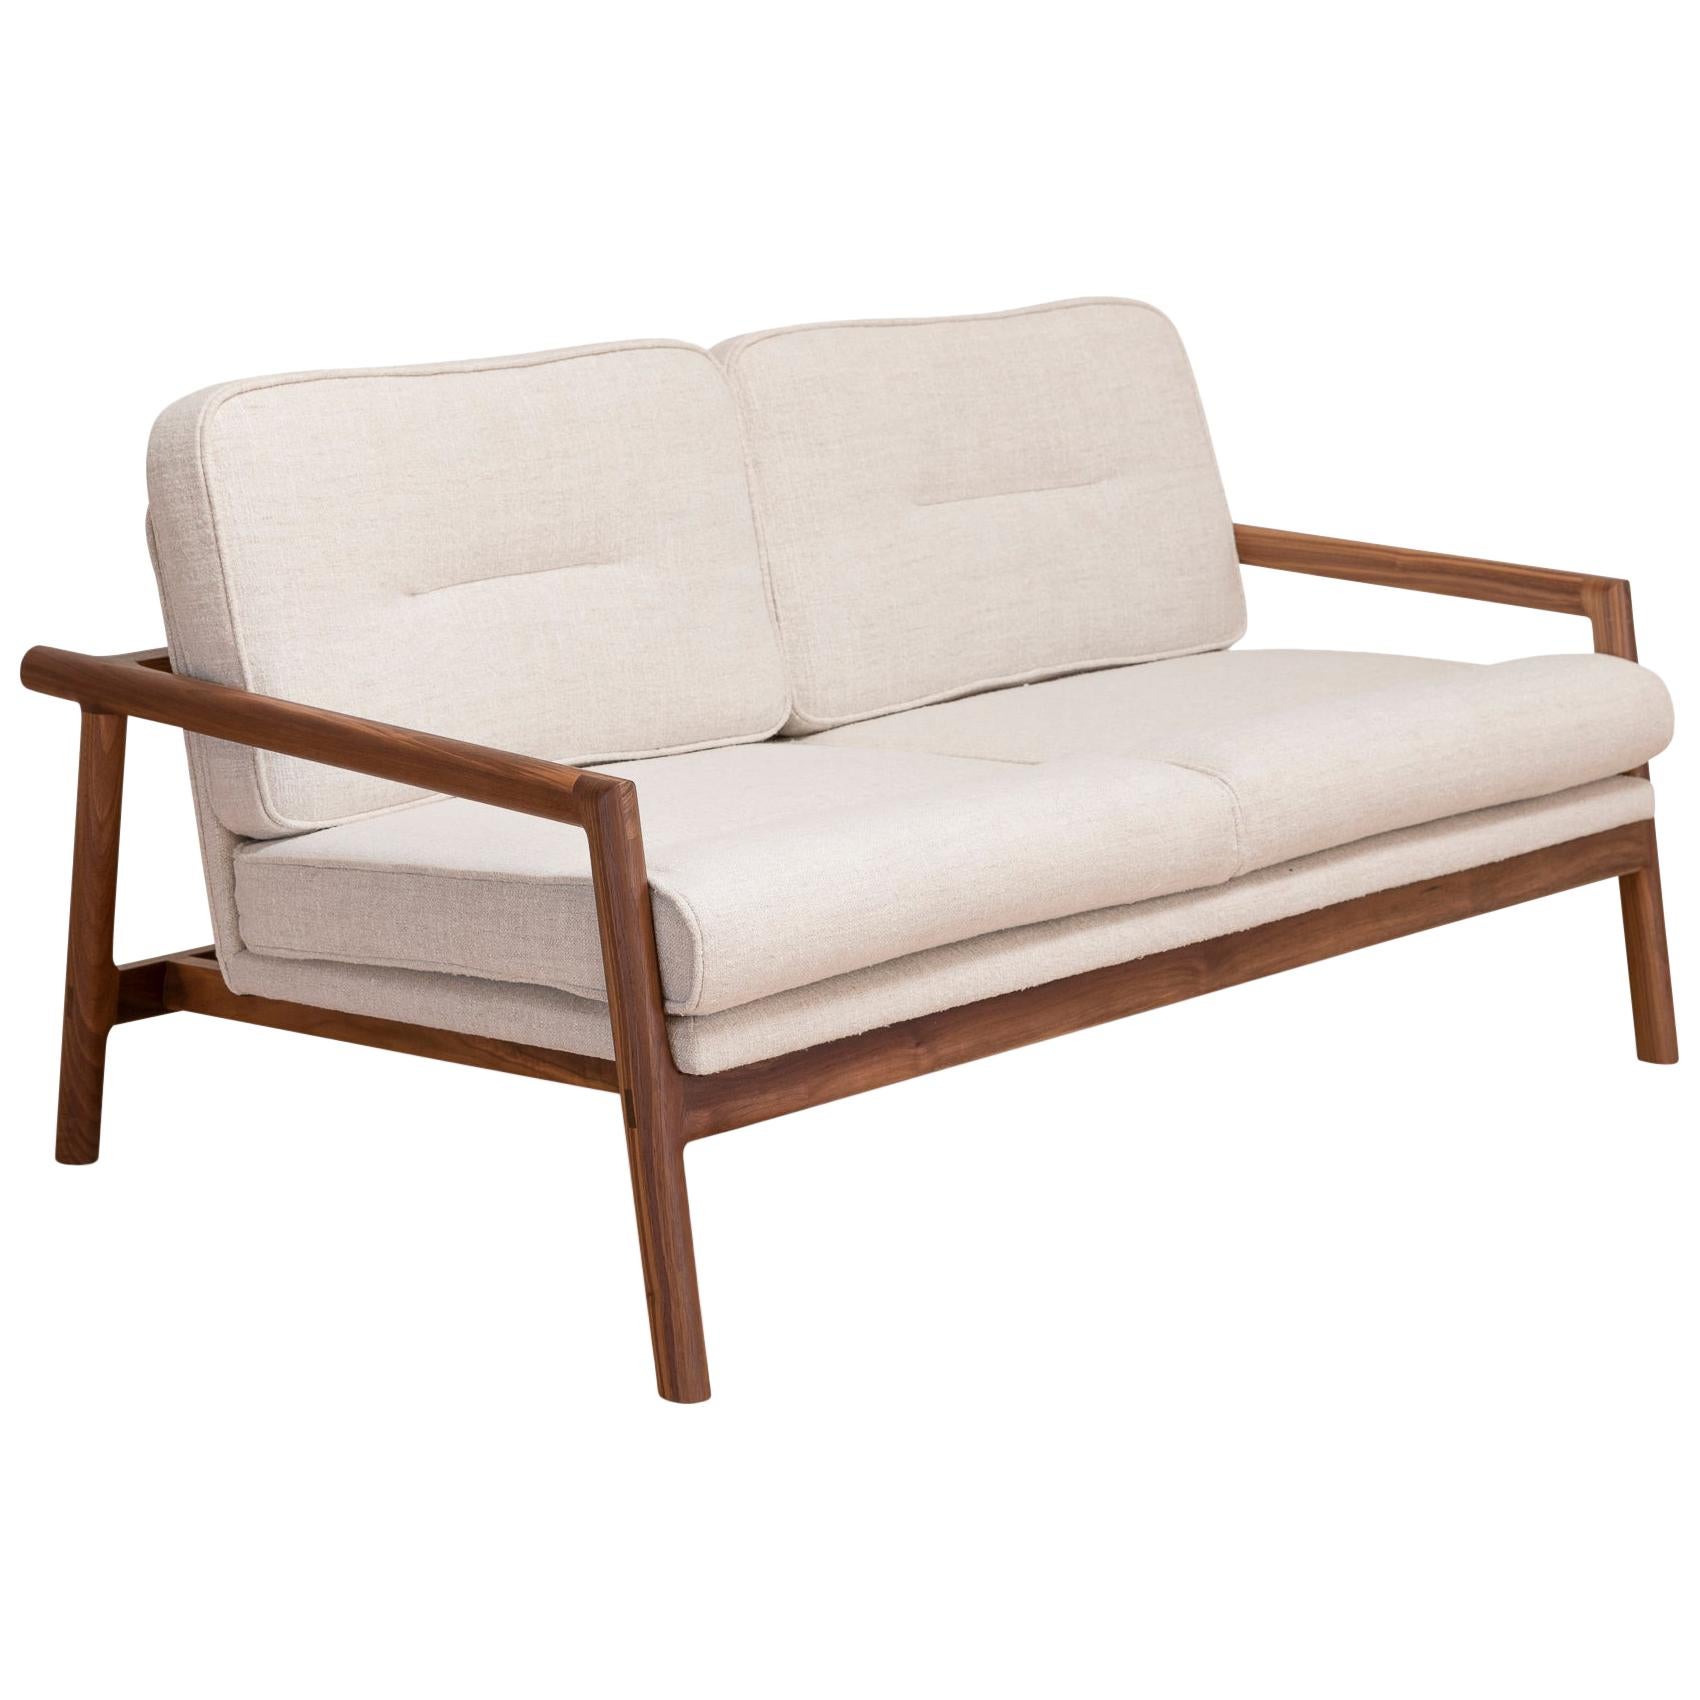 EARL Handcrafted Walnut Moresby Loveseat with Custom Linen or Leather Upholstery For Sale